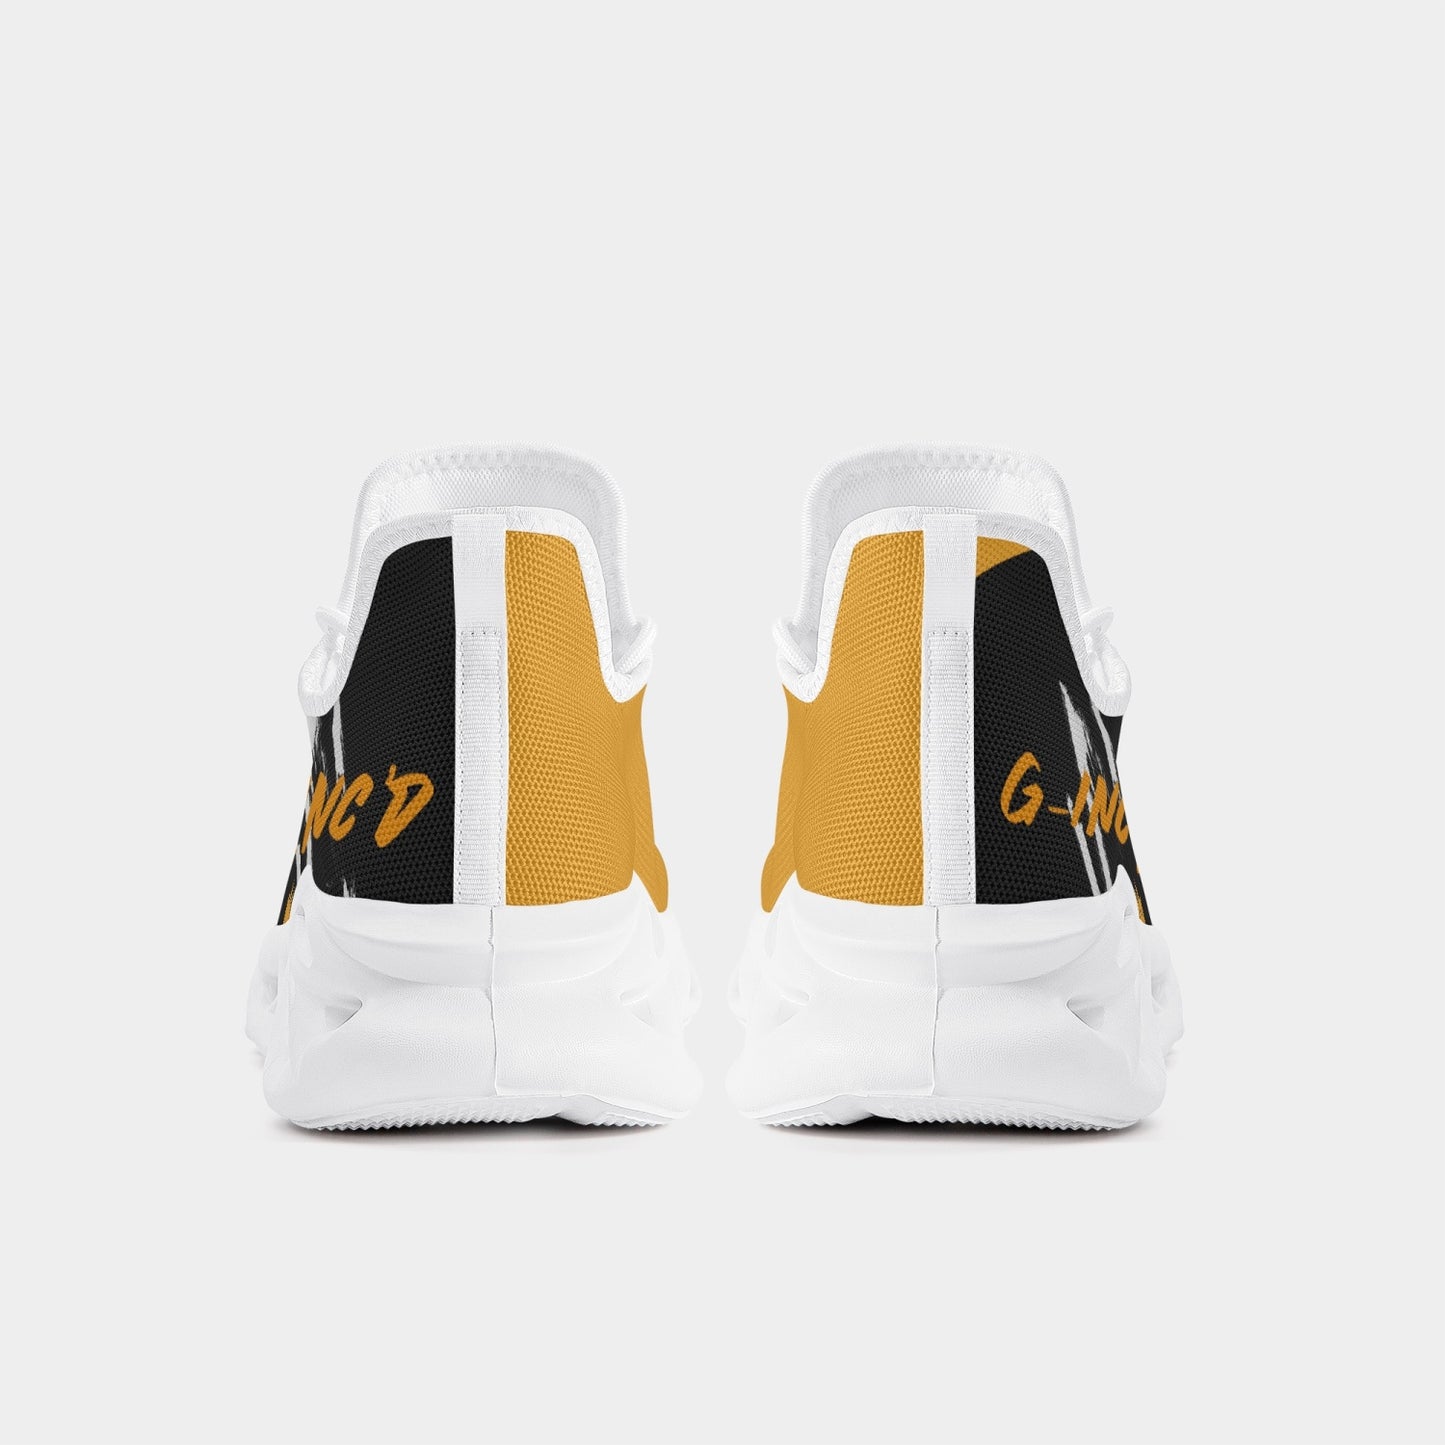 G-Inc'd Mesh Knit Sneakers - Gold